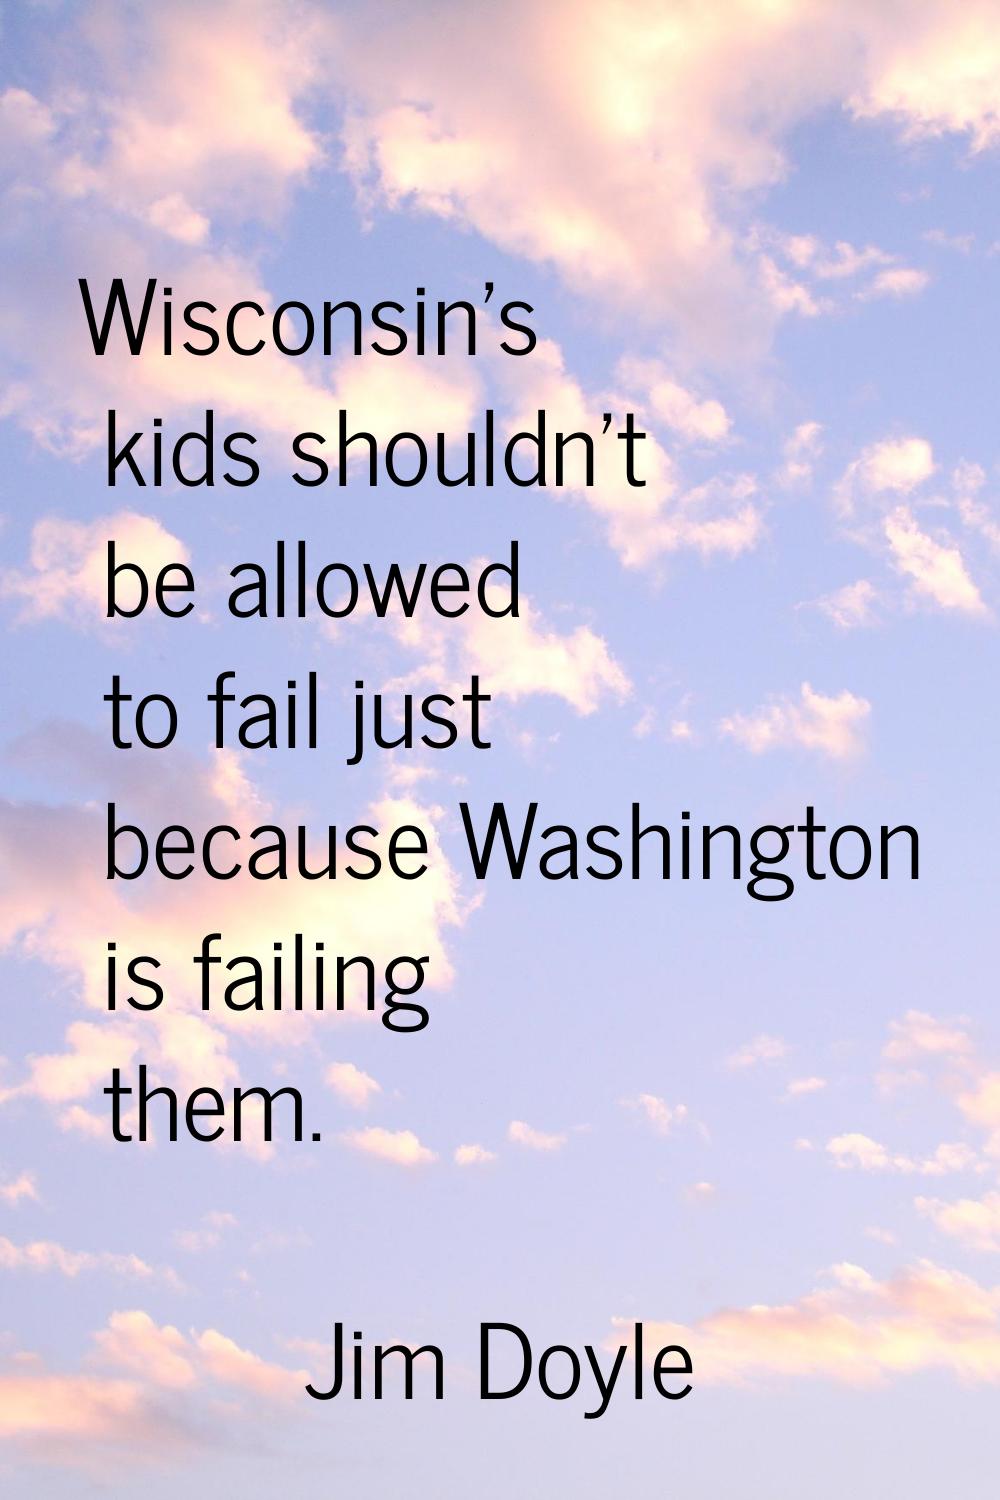 Wisconsin's kids shouldn't be allowed to fail just because Washington is failing them.